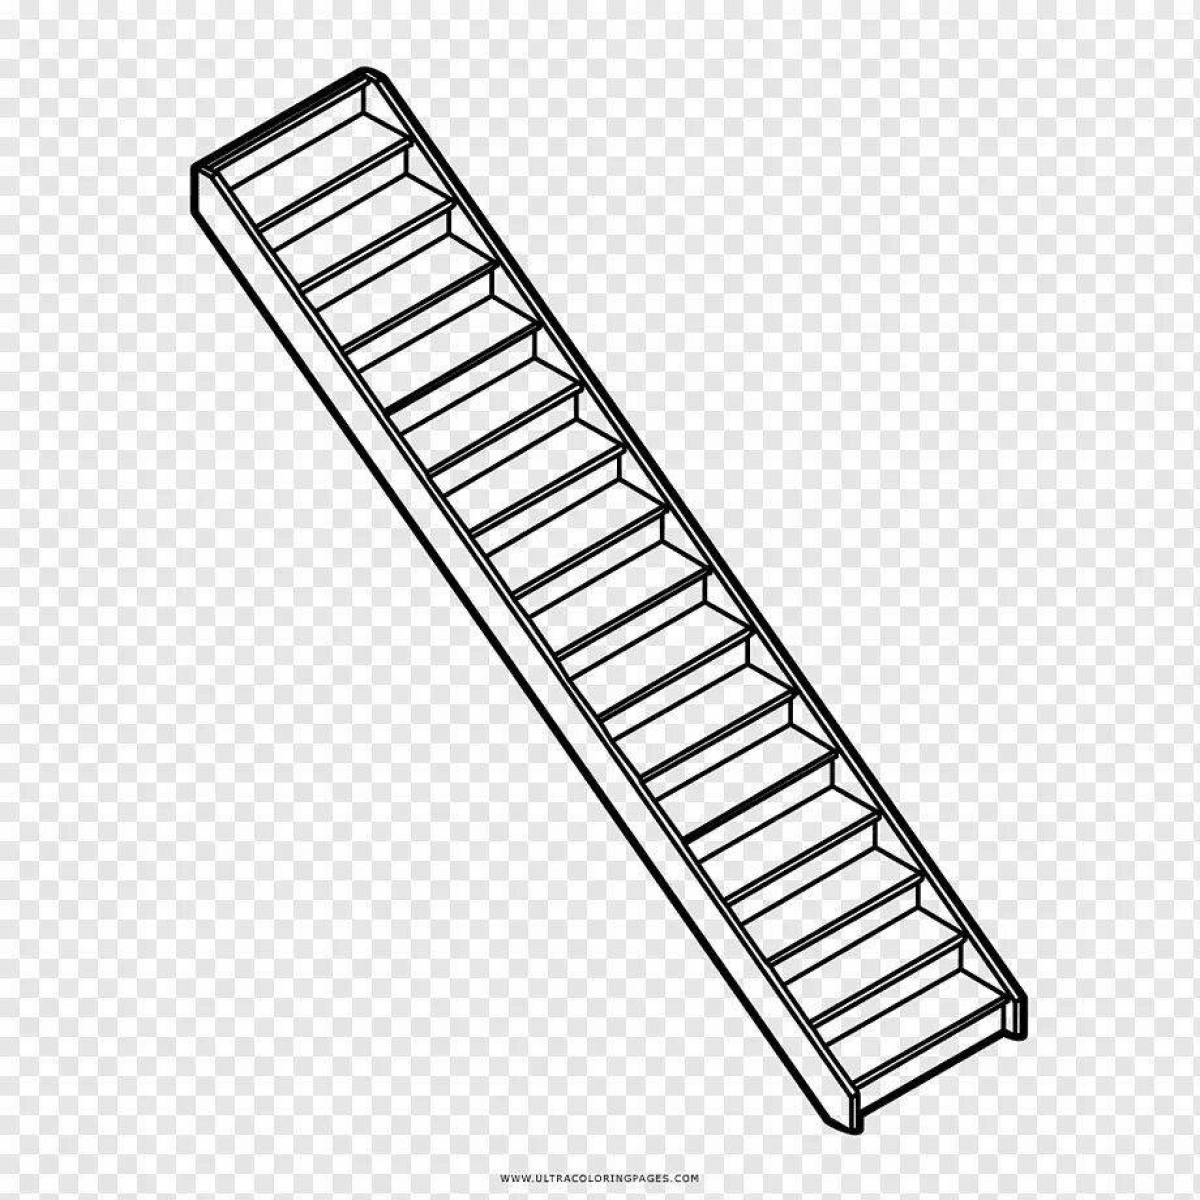 Glorious Stairs coloring page